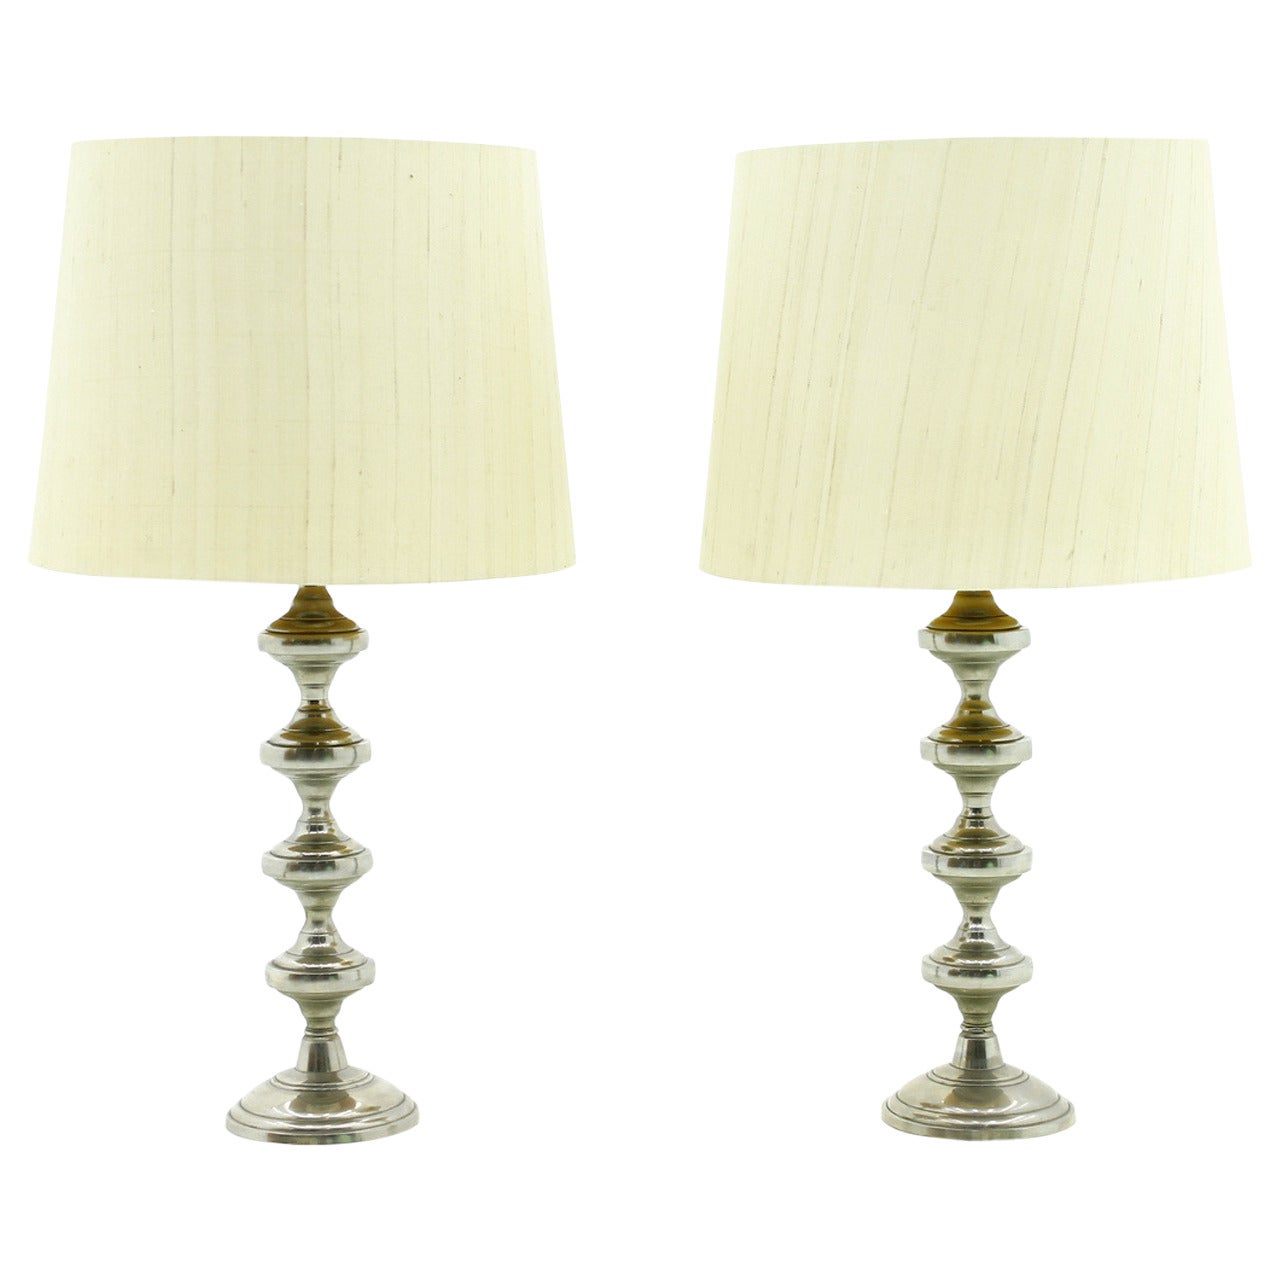 Nice Pair of Decorative Metall Table Lamps, 1970s